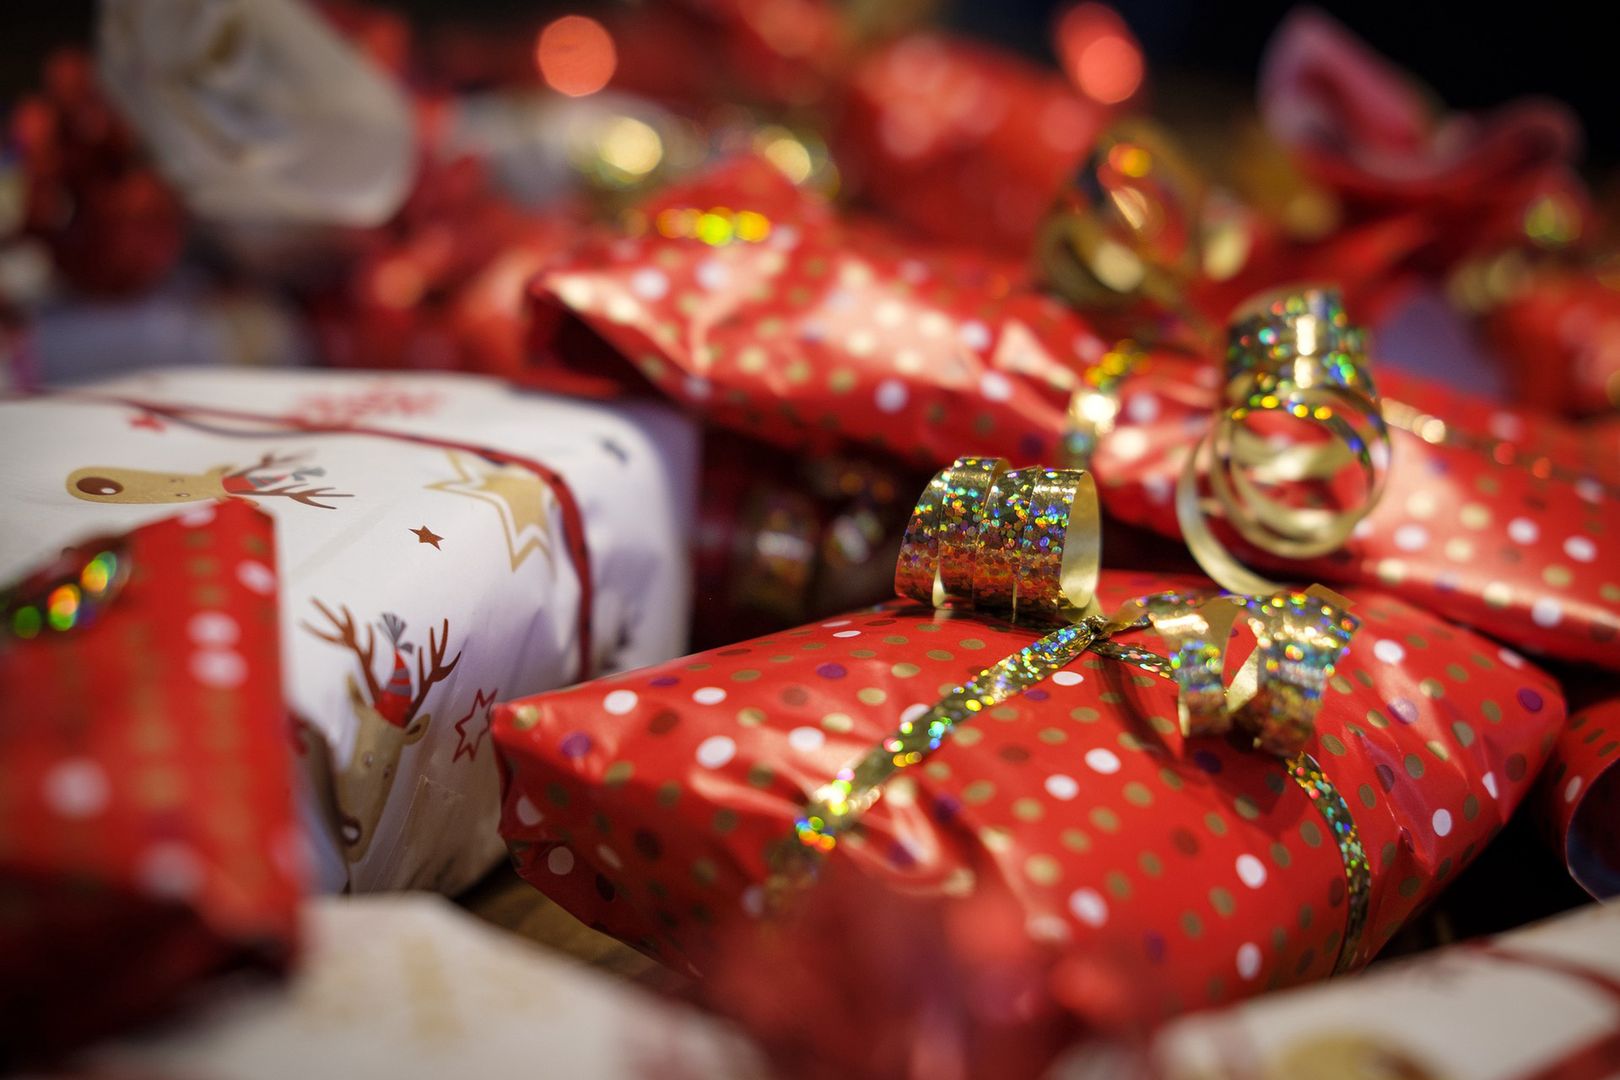 Tax is paid on these gifts.  Otherwise, there is a penalty – o2